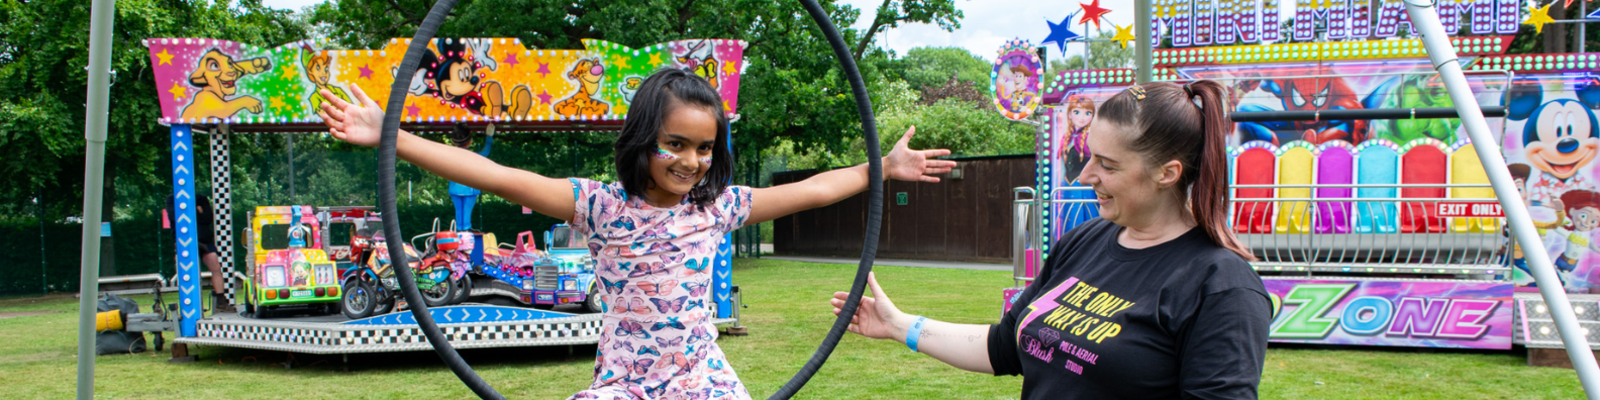 young girl posing on an aerial hoop next to an instructor smiling at her